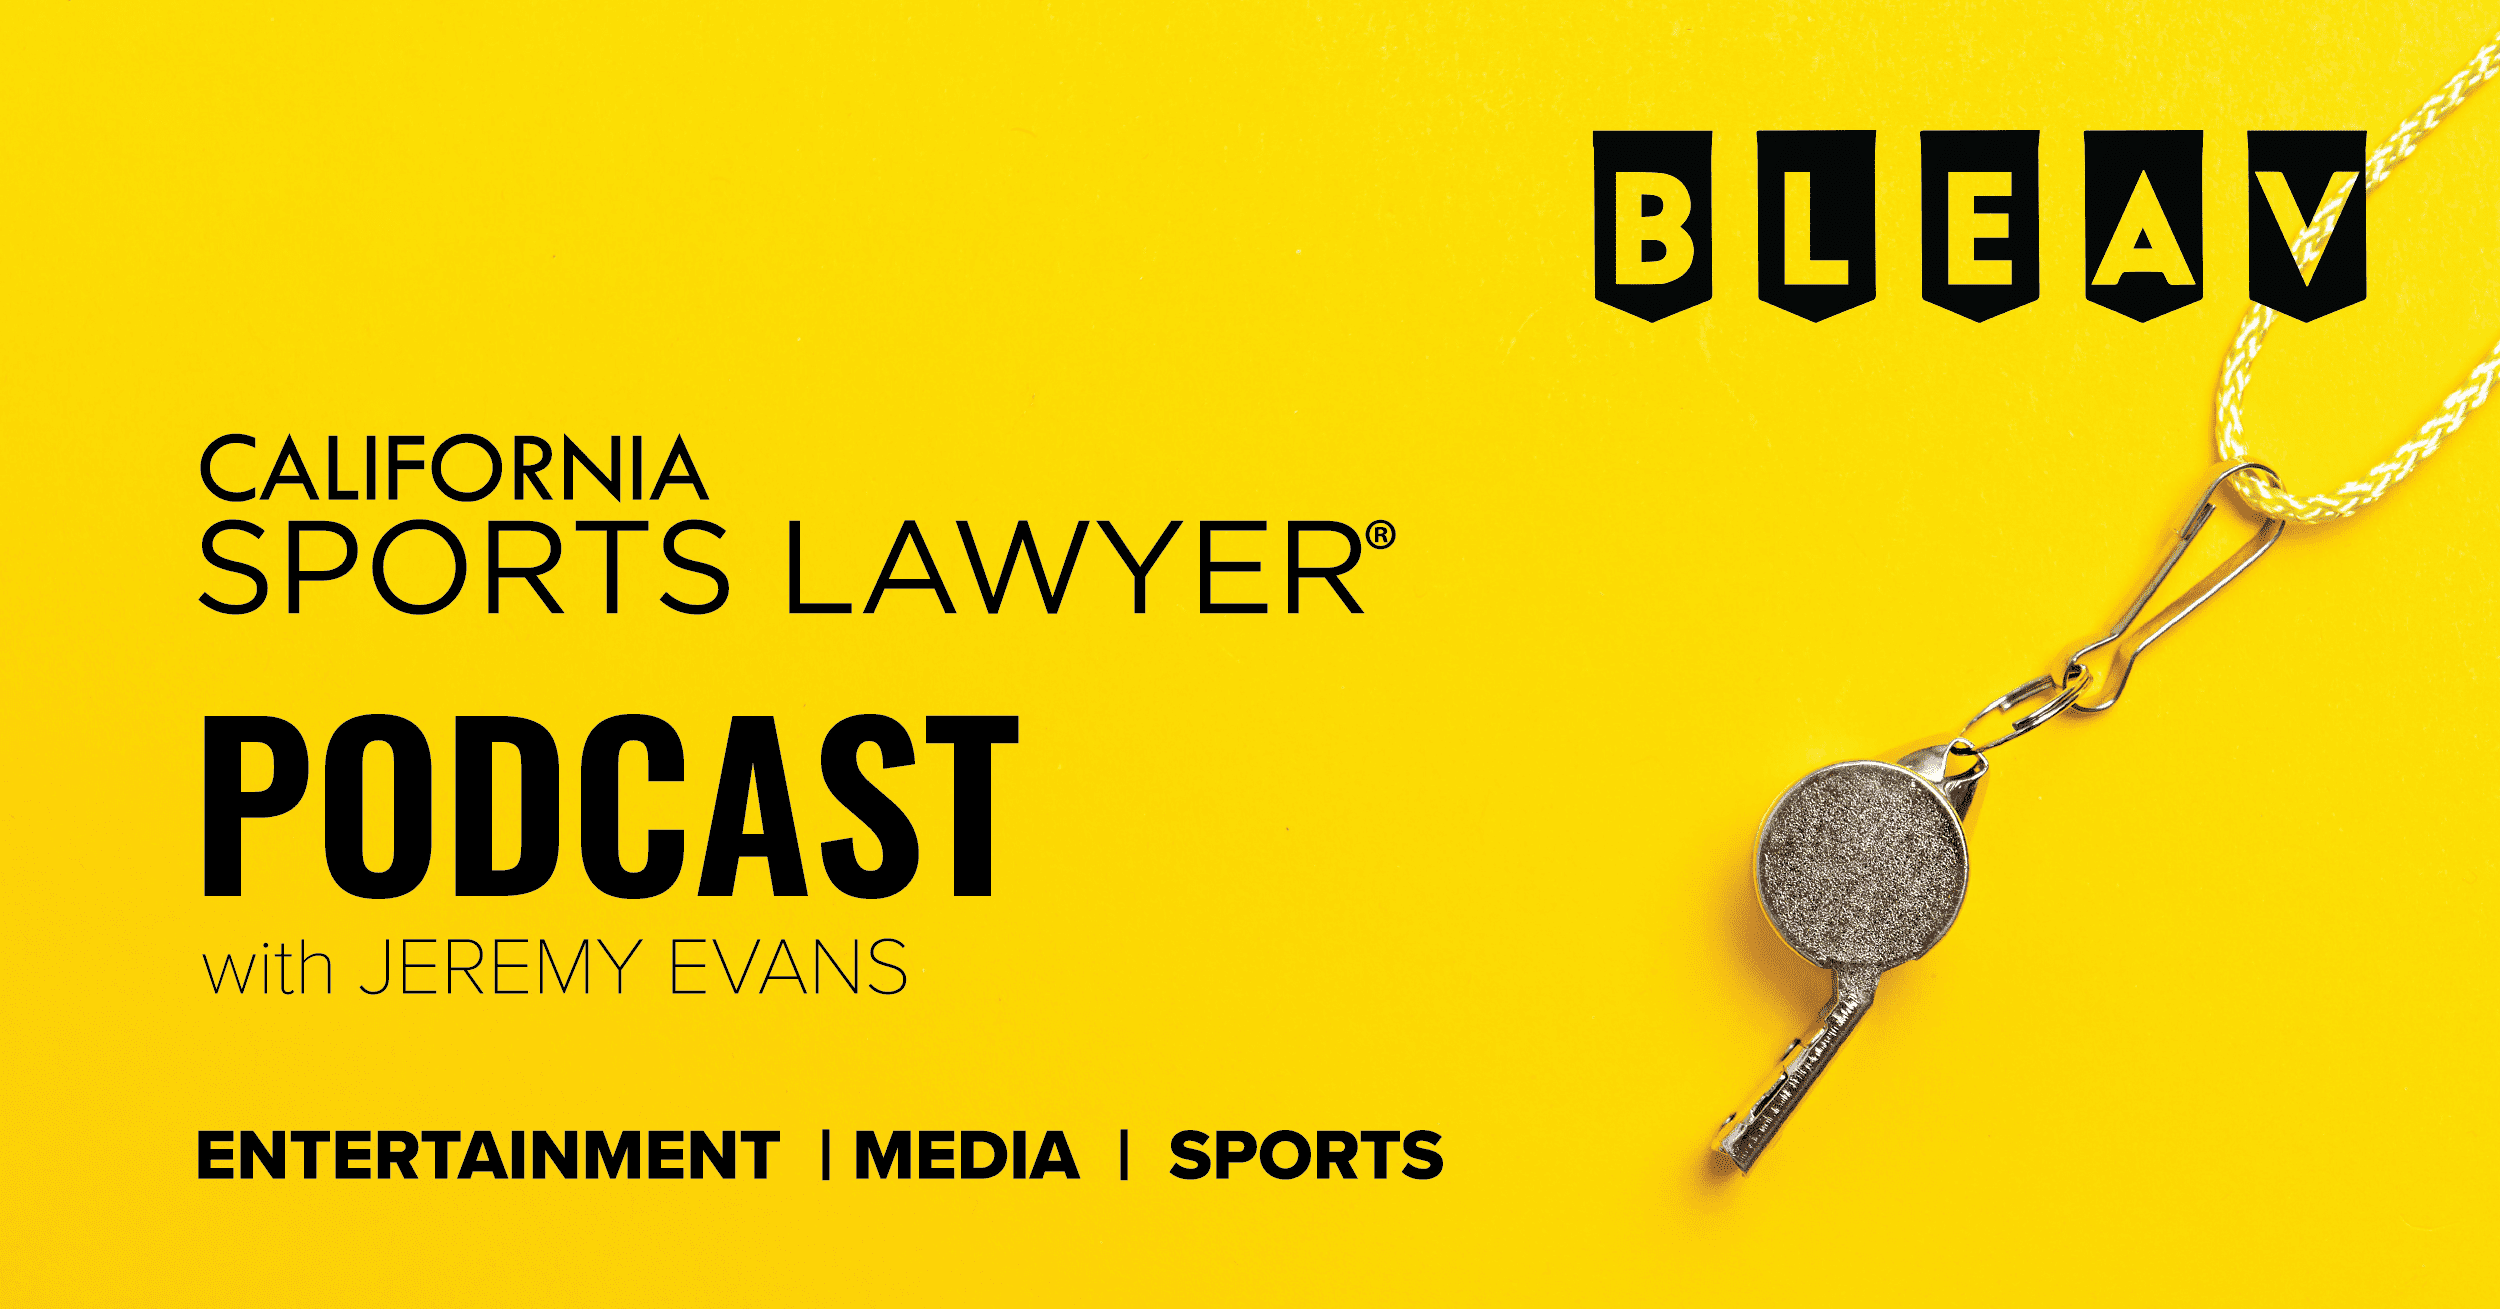 The California Sports Lawyer® Podcast with Jeremy Evans: The Popularity of Sports Continues to Rise